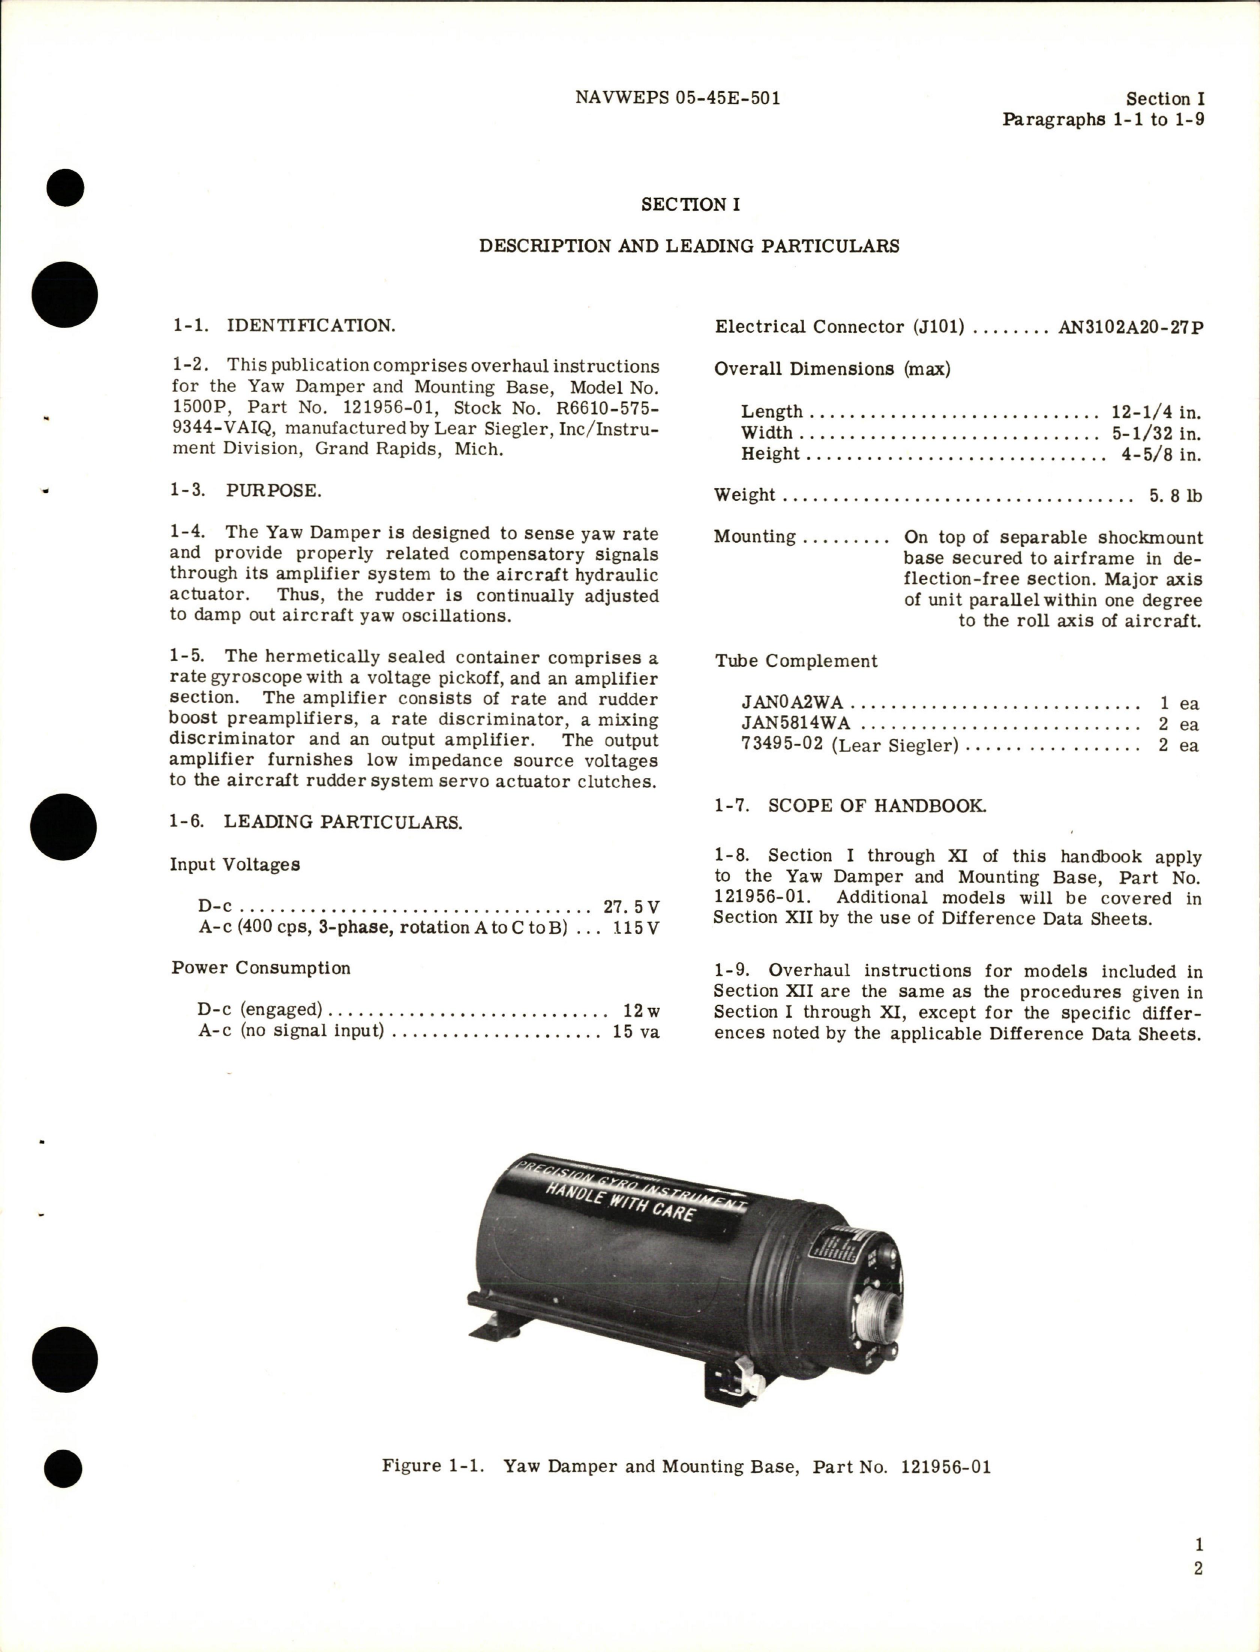 Sample page 7 from AirCorps Library document: Overhaul Instructions for Yaw Damper and Mounting Base - Model 1500P and 1500P-1 - Parts 121956-01 and 121956-02